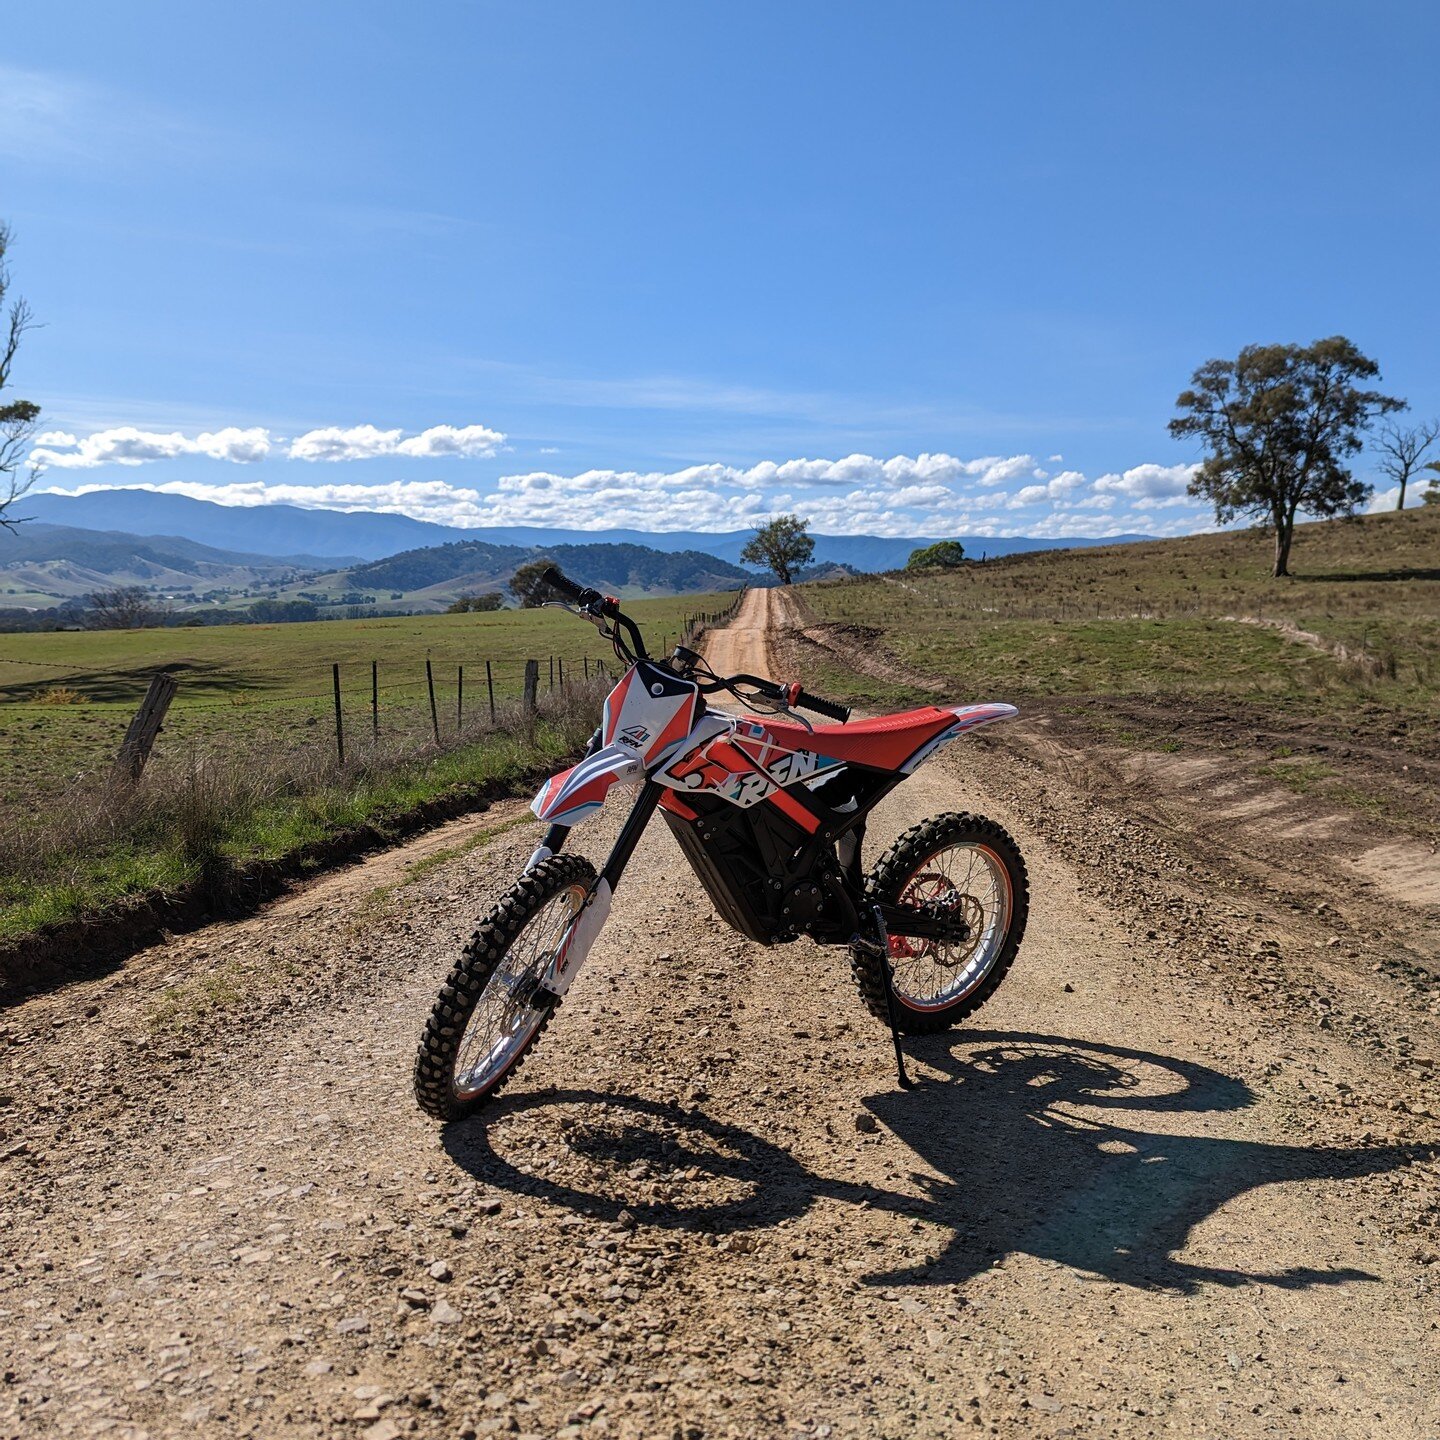 The ultimate all-terrain dual-purpose electric off-road motorcycle! This cutting-edge motorcycle is designed for adventurous riders who seek to explore uncharted territories.
.
.
.
.
#surron #RFN #dirtbike #emoto #rfnbike #electricbike #electric #rac